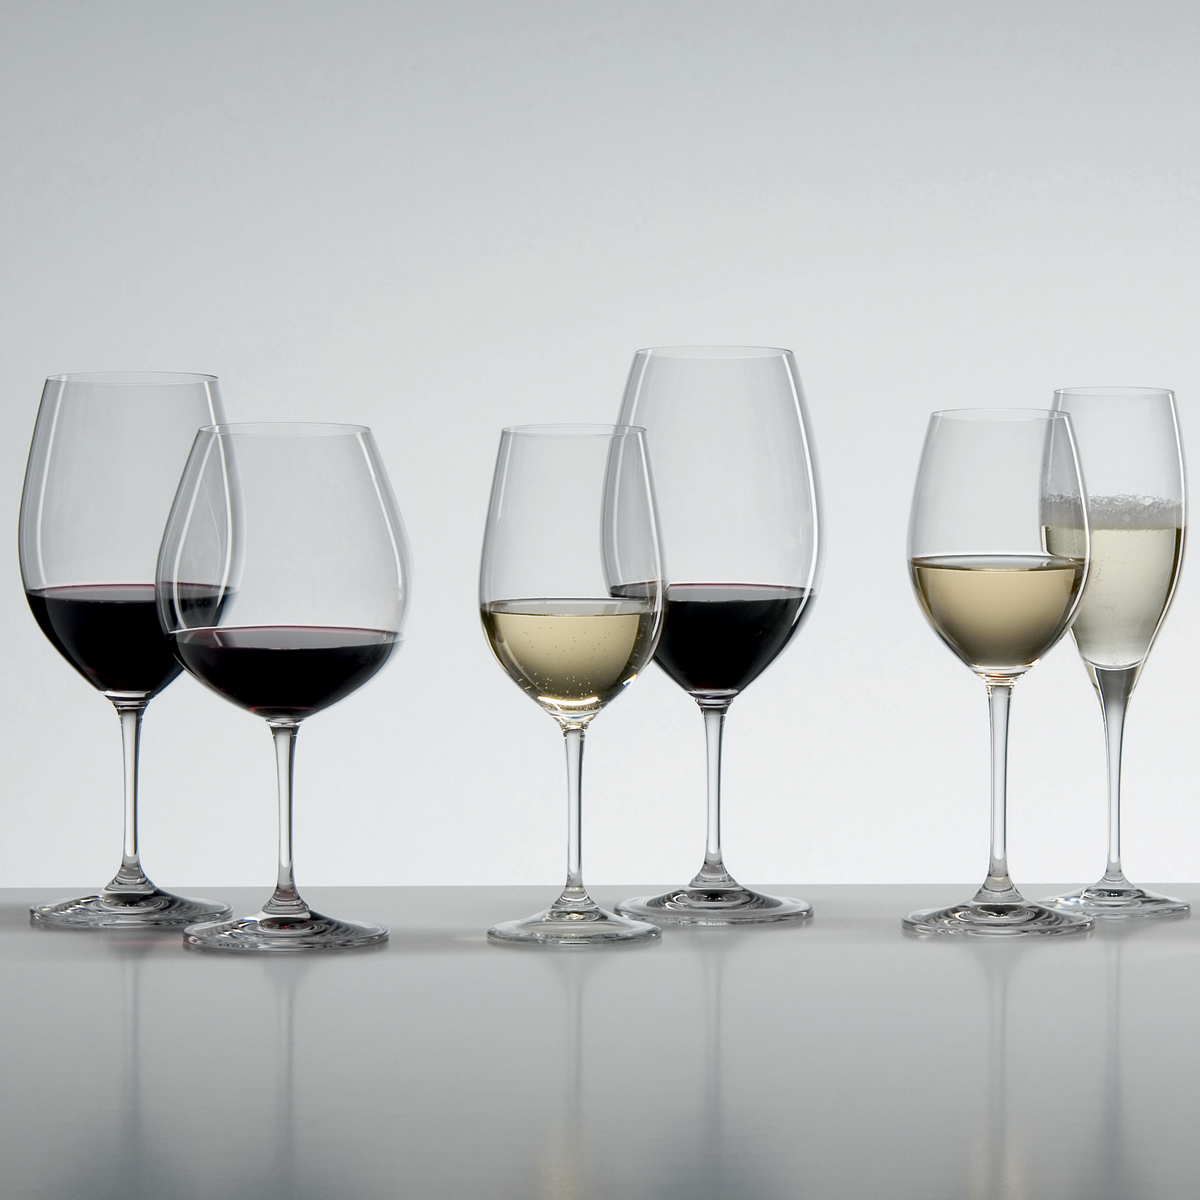 Mentor erektion gas Which Riedel wine glass to choose - Wineware.co.uk